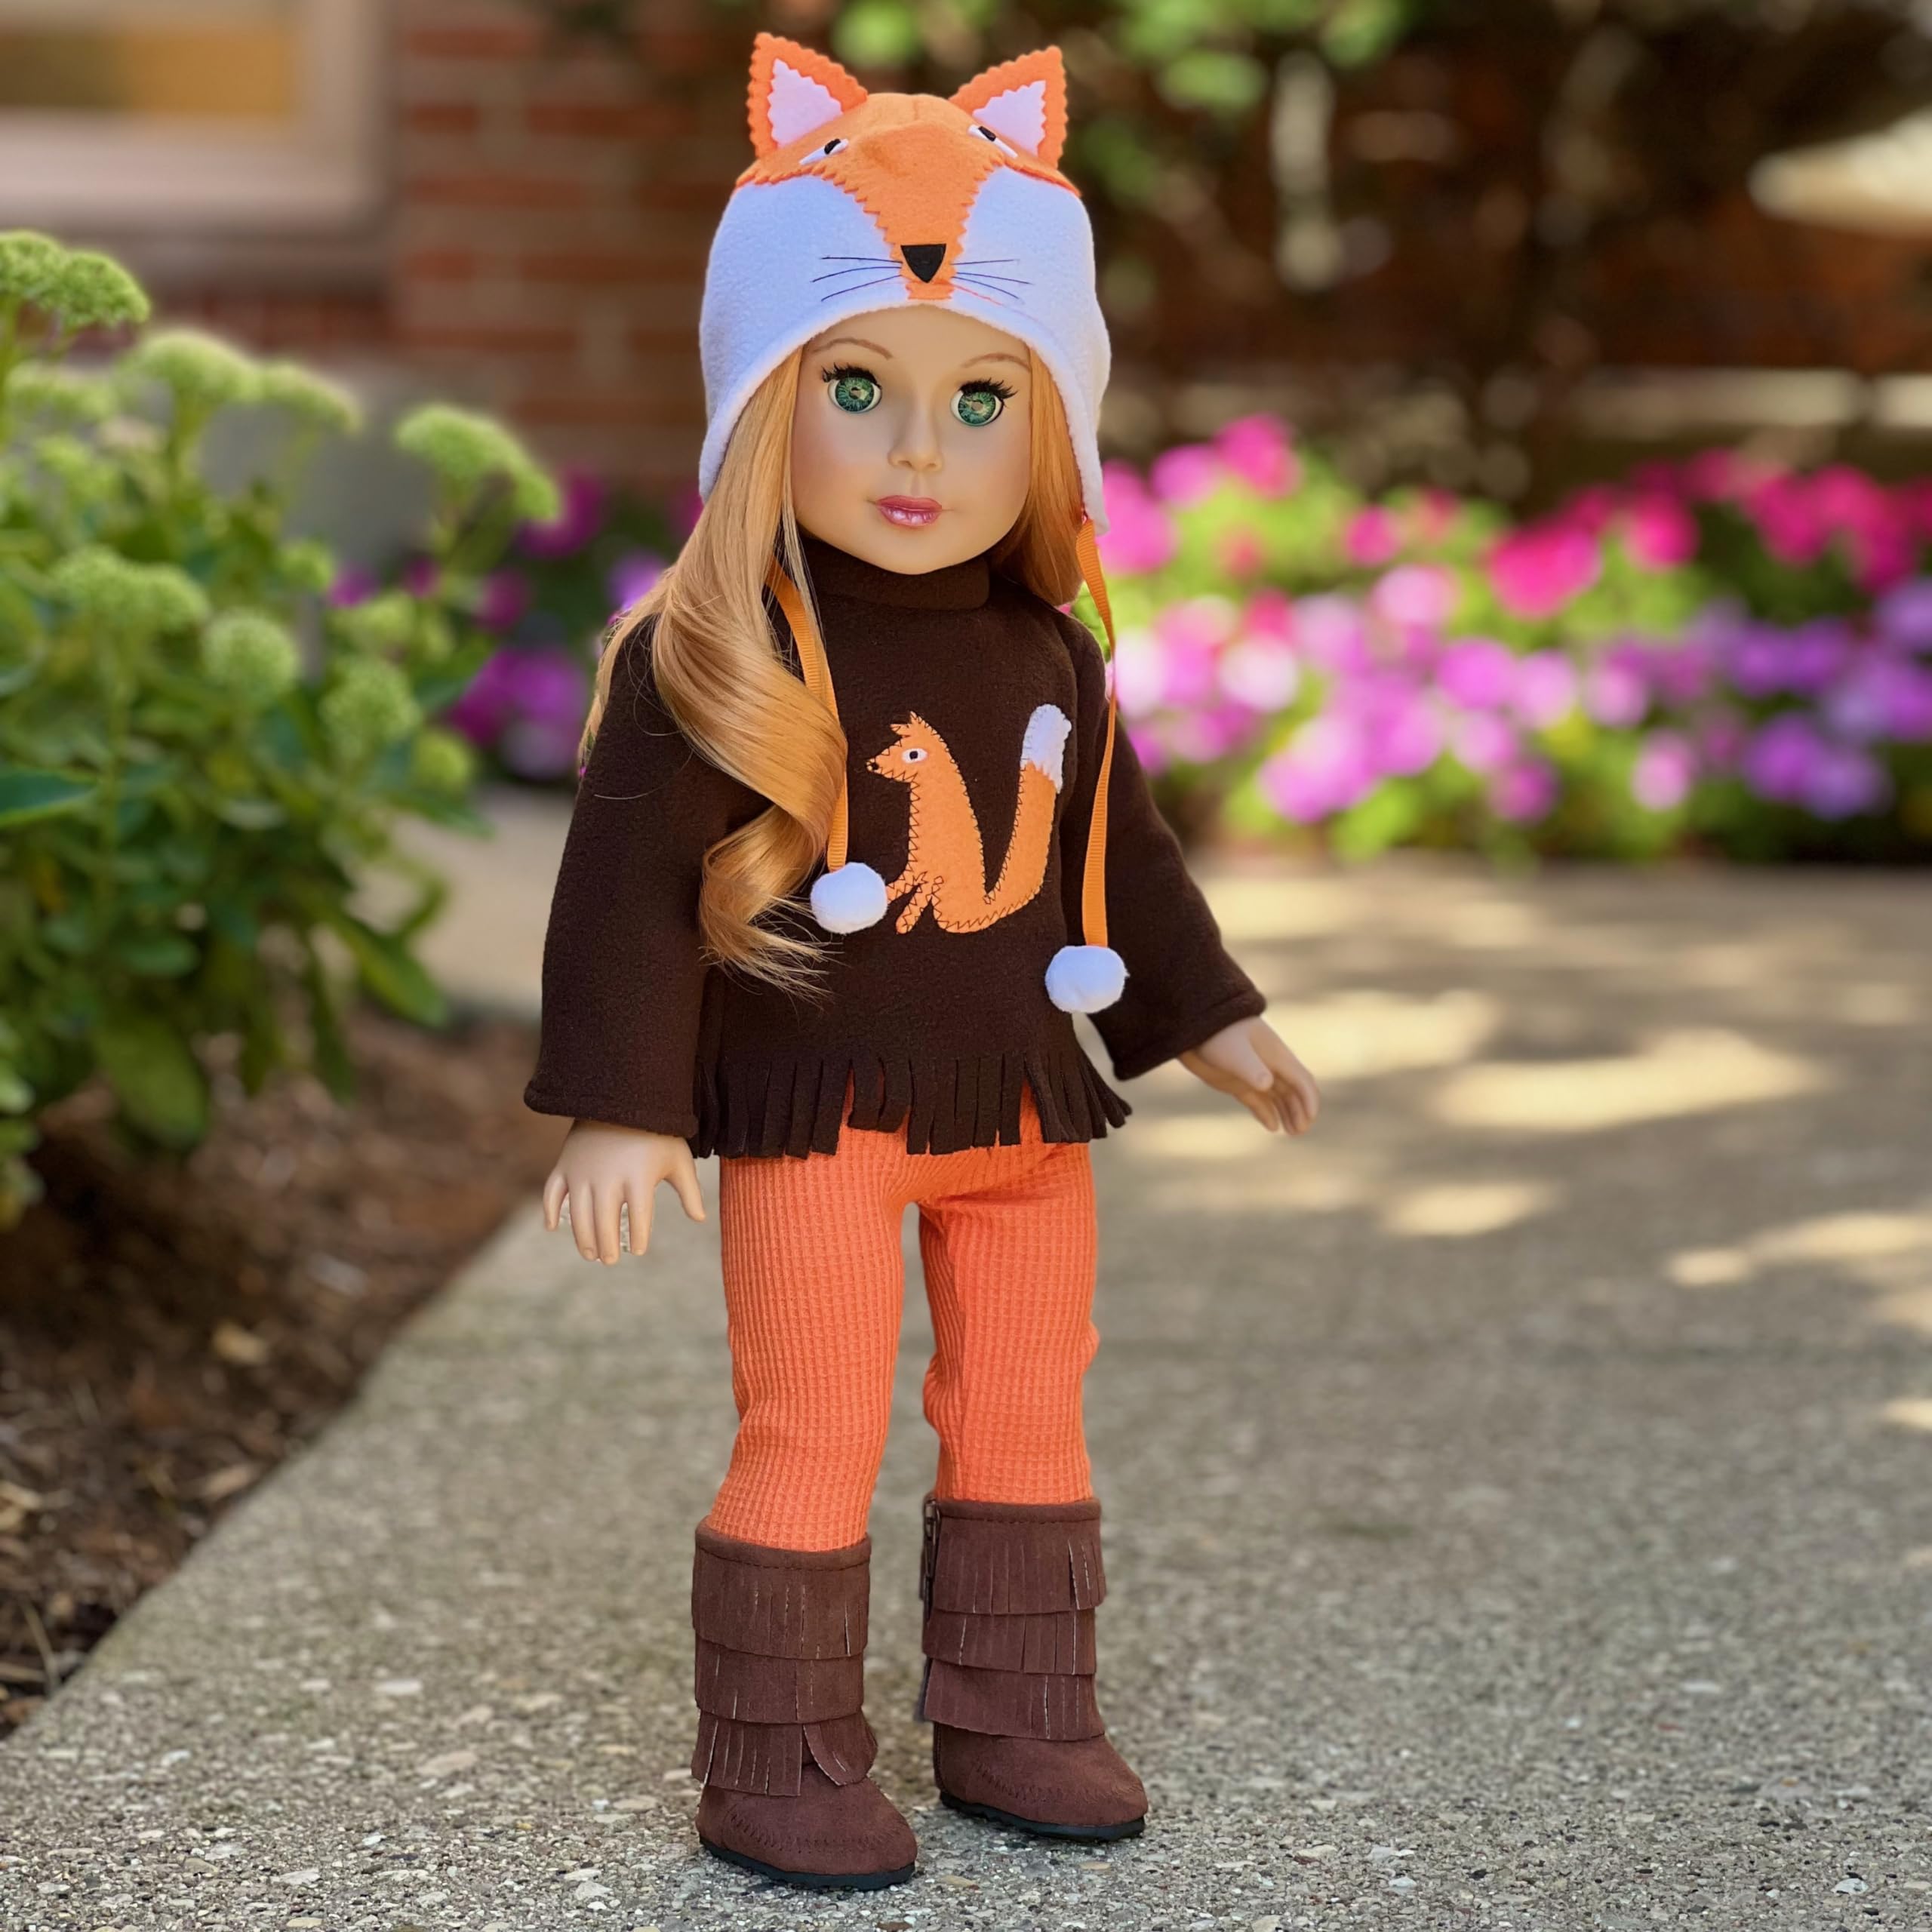 - Foxy - 4 Piece Outfit - Hat, Blouse, Leggings and Boots. Clothes Fits 18 Inch Doll (Doll Not Included)